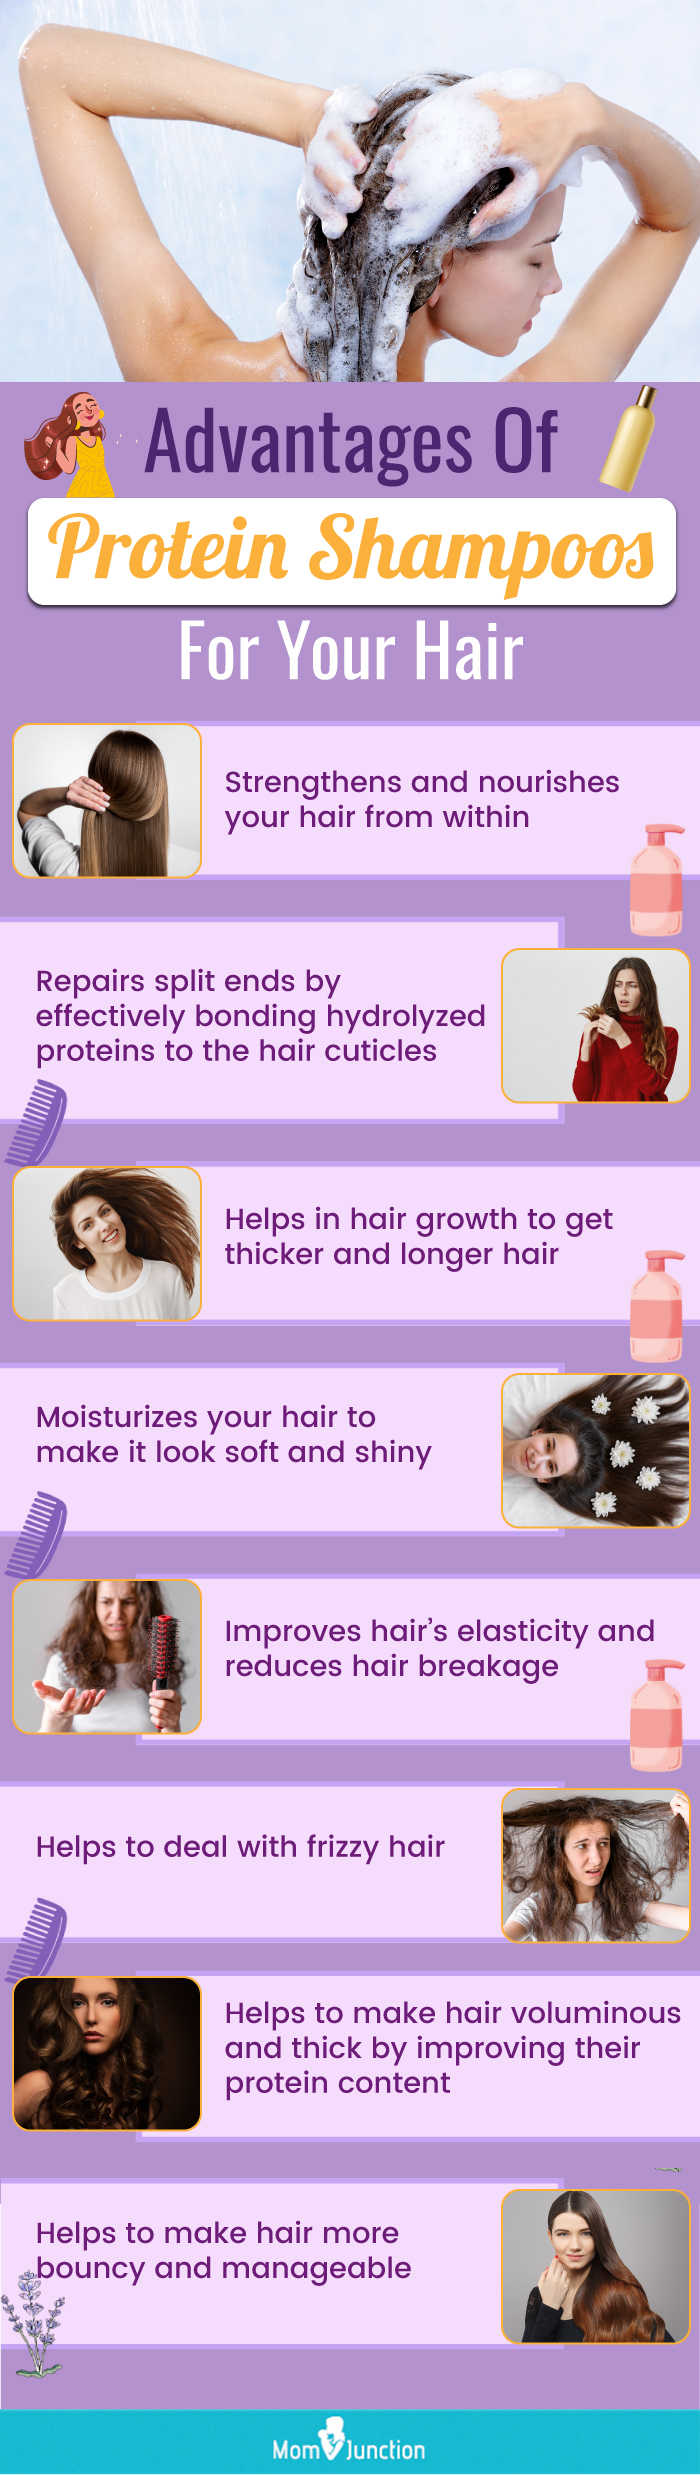 Advantages Of Protein Shampoos For Your Hair (infographic)